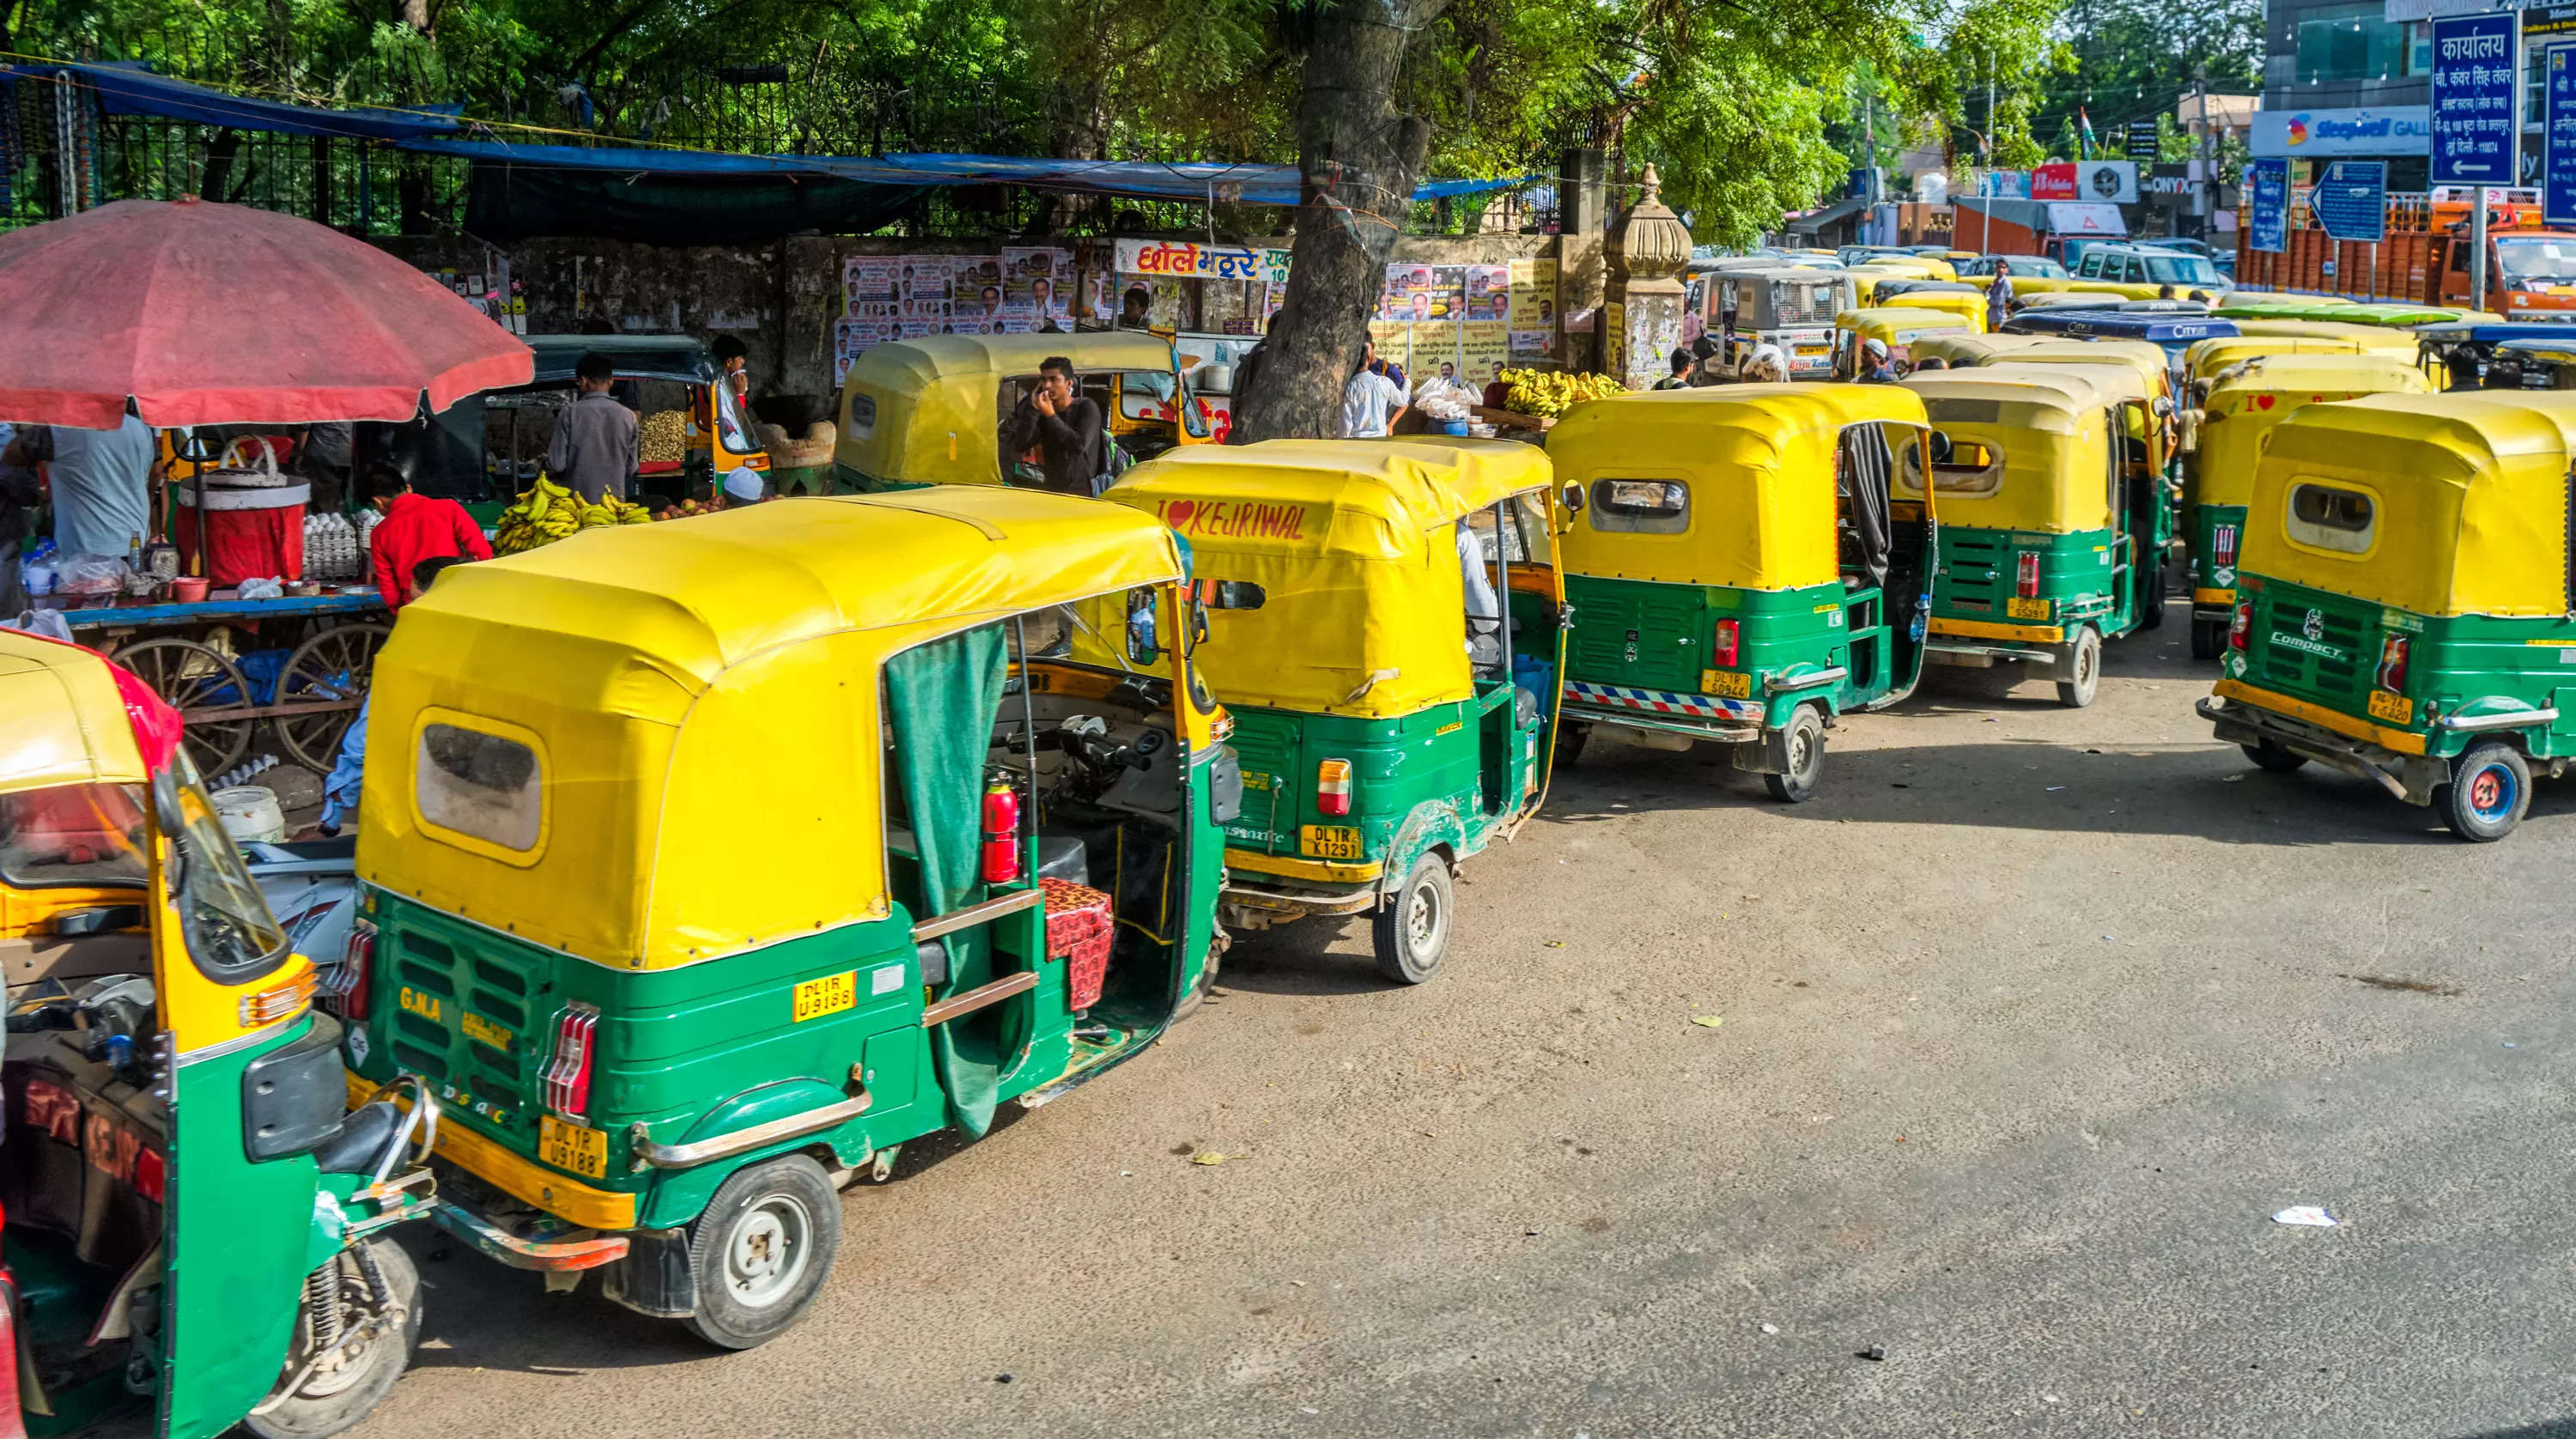 “Out of these permits capped at one lakh, around 4,200 to 5,000 permits still remain to be issued, and it is these permits that the Delhi government is now seeking to issue,” Bajaj said.